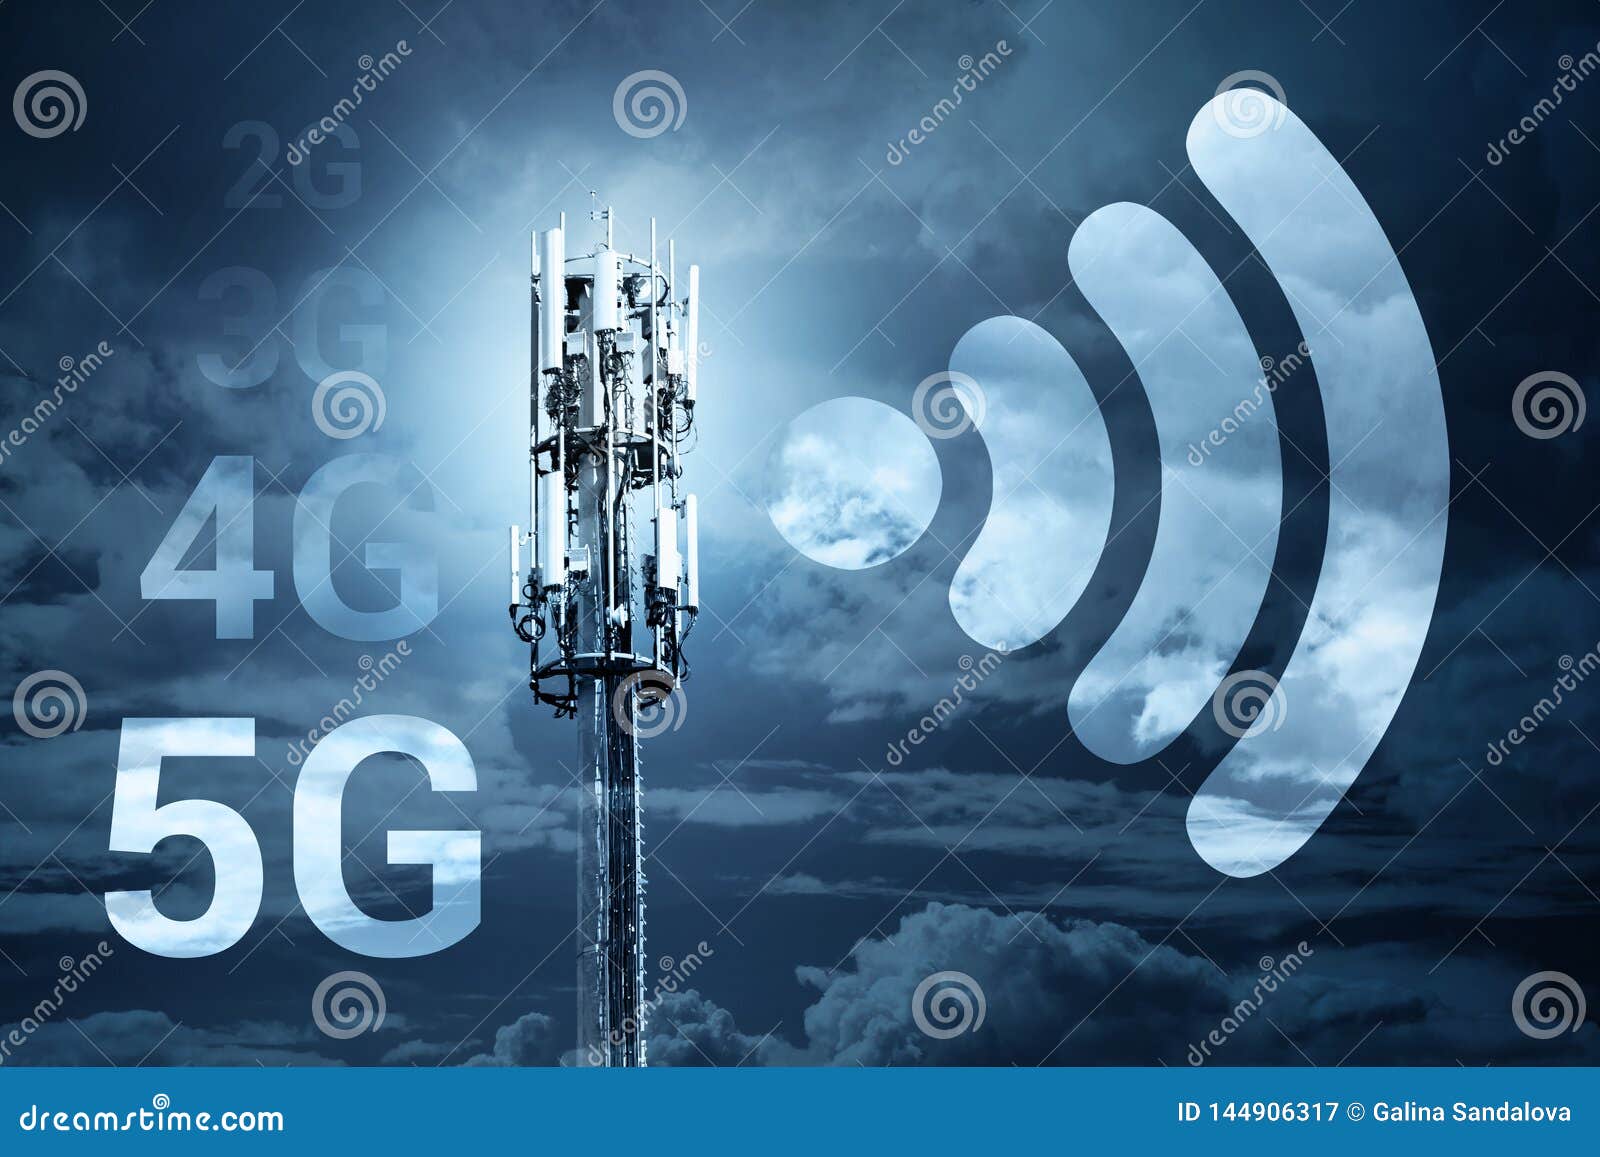 5g fast speed wireless internet connection communication mobile technology concept